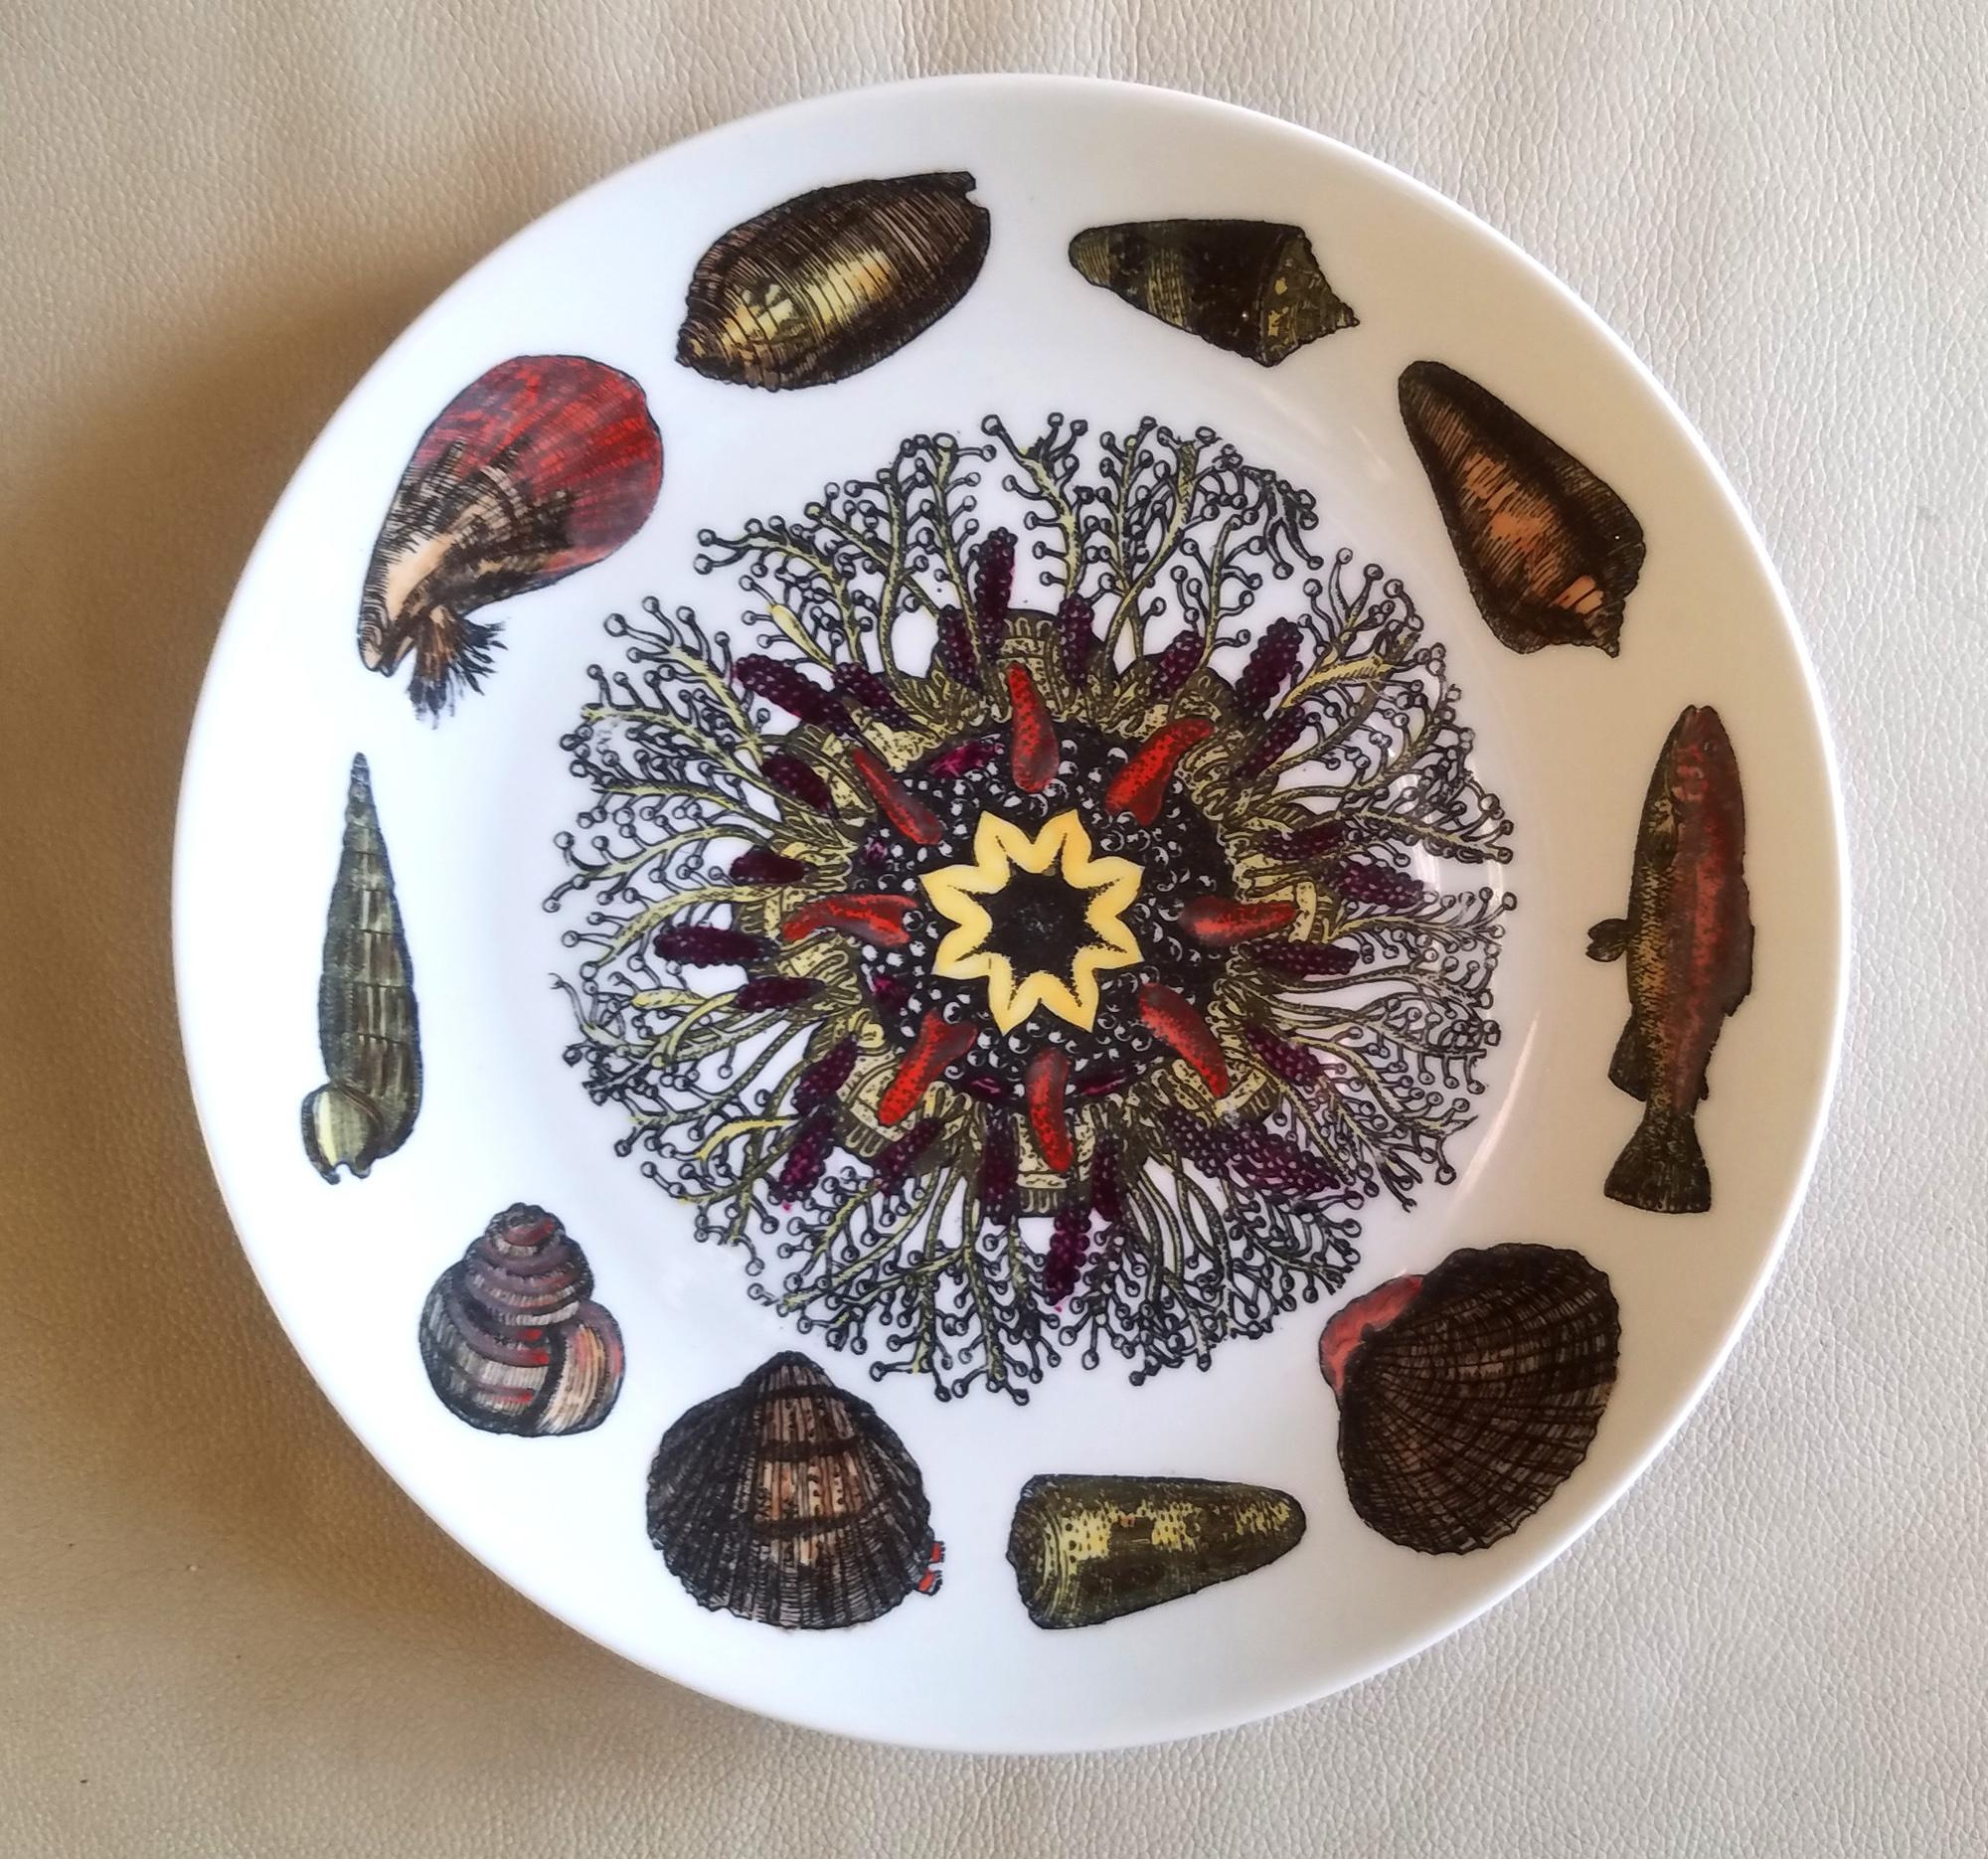 Piero Fornasetti Porcelain Conchiglie Seashell Set of Plates with Mollusks For Sale 3